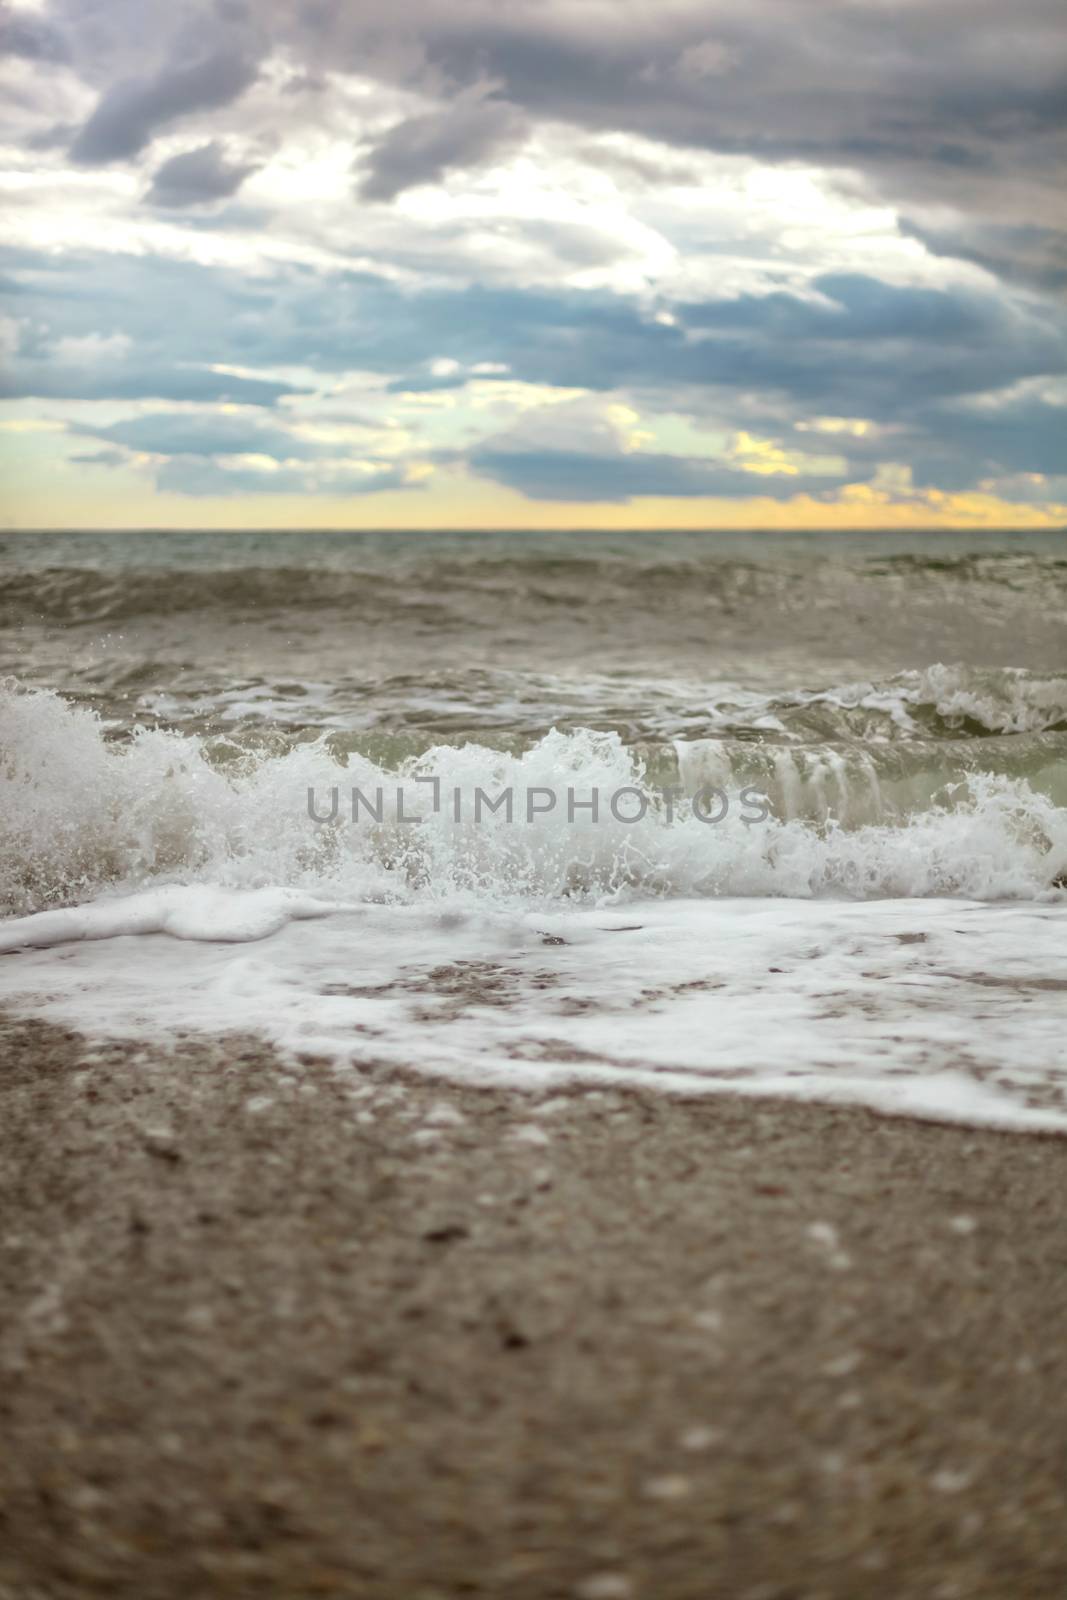 summer Sea or ocean cloudy sky, wave after storm with splash. Space for text.